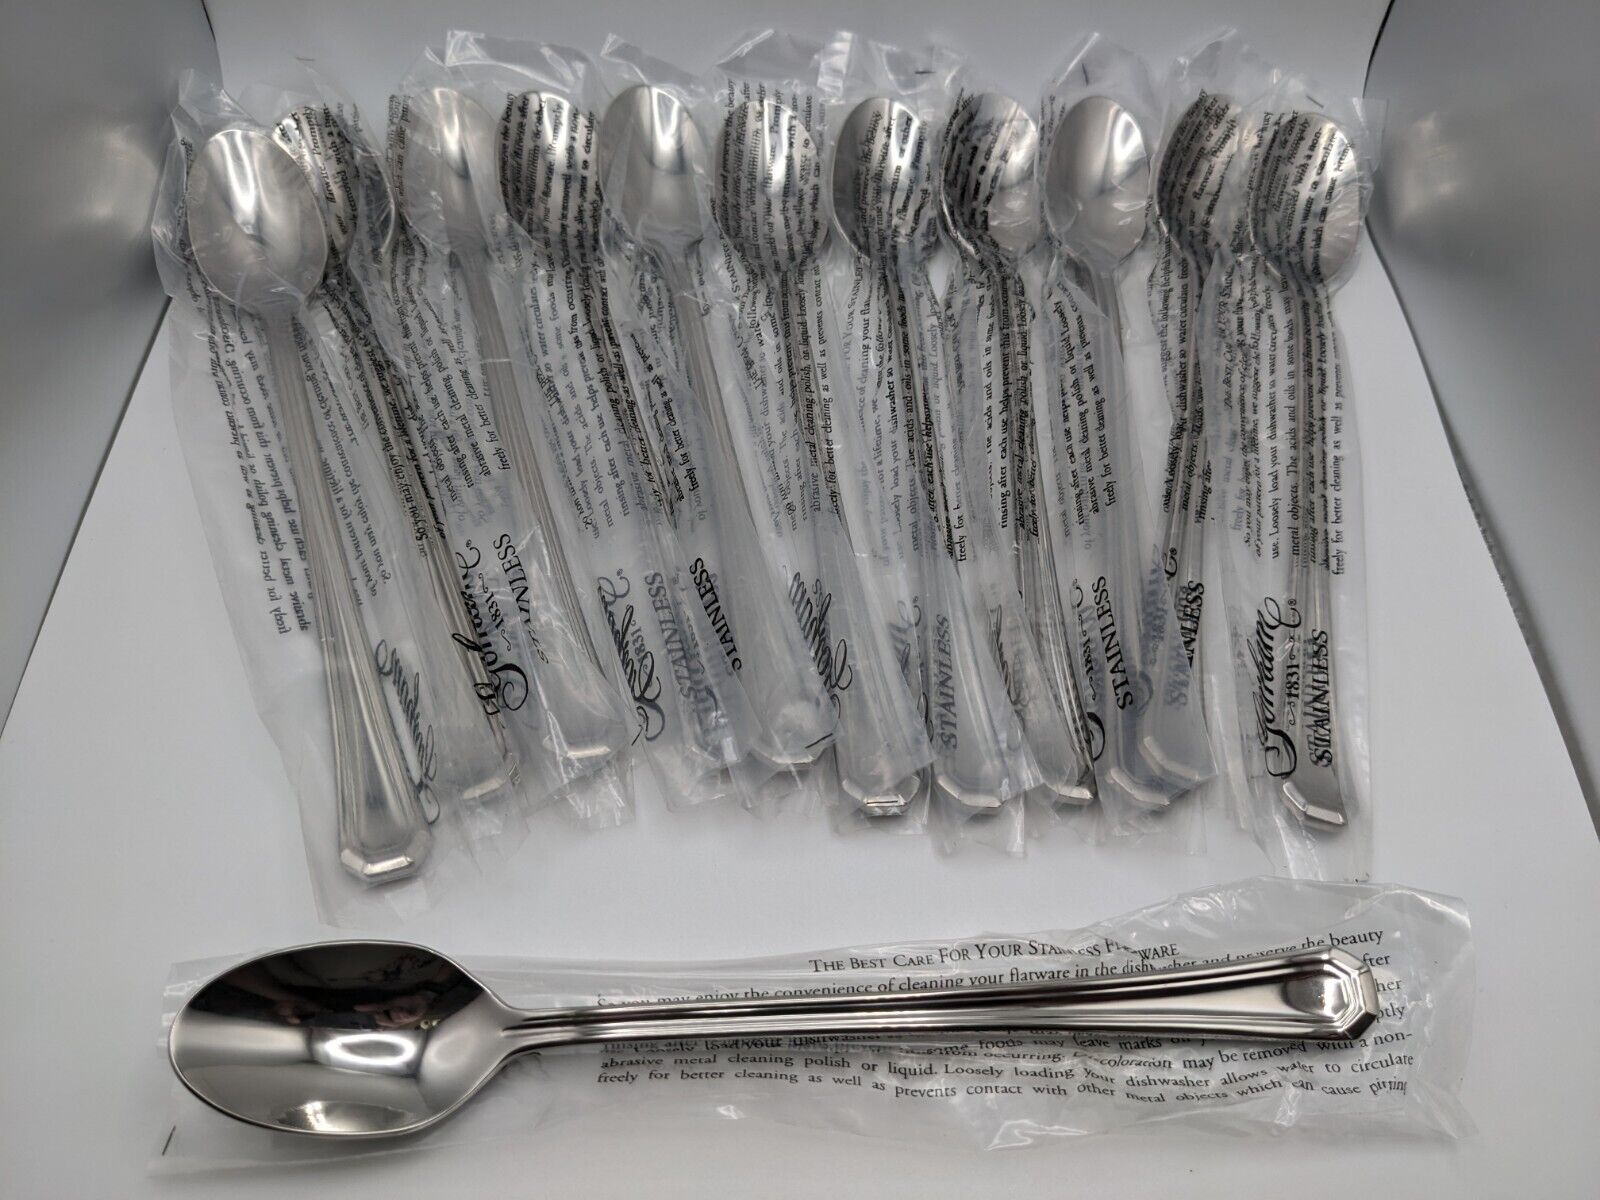 (12) New Gorham 1831 FAIRVIEW 18/8 Stainless ICED TEA SPOONS 7.5